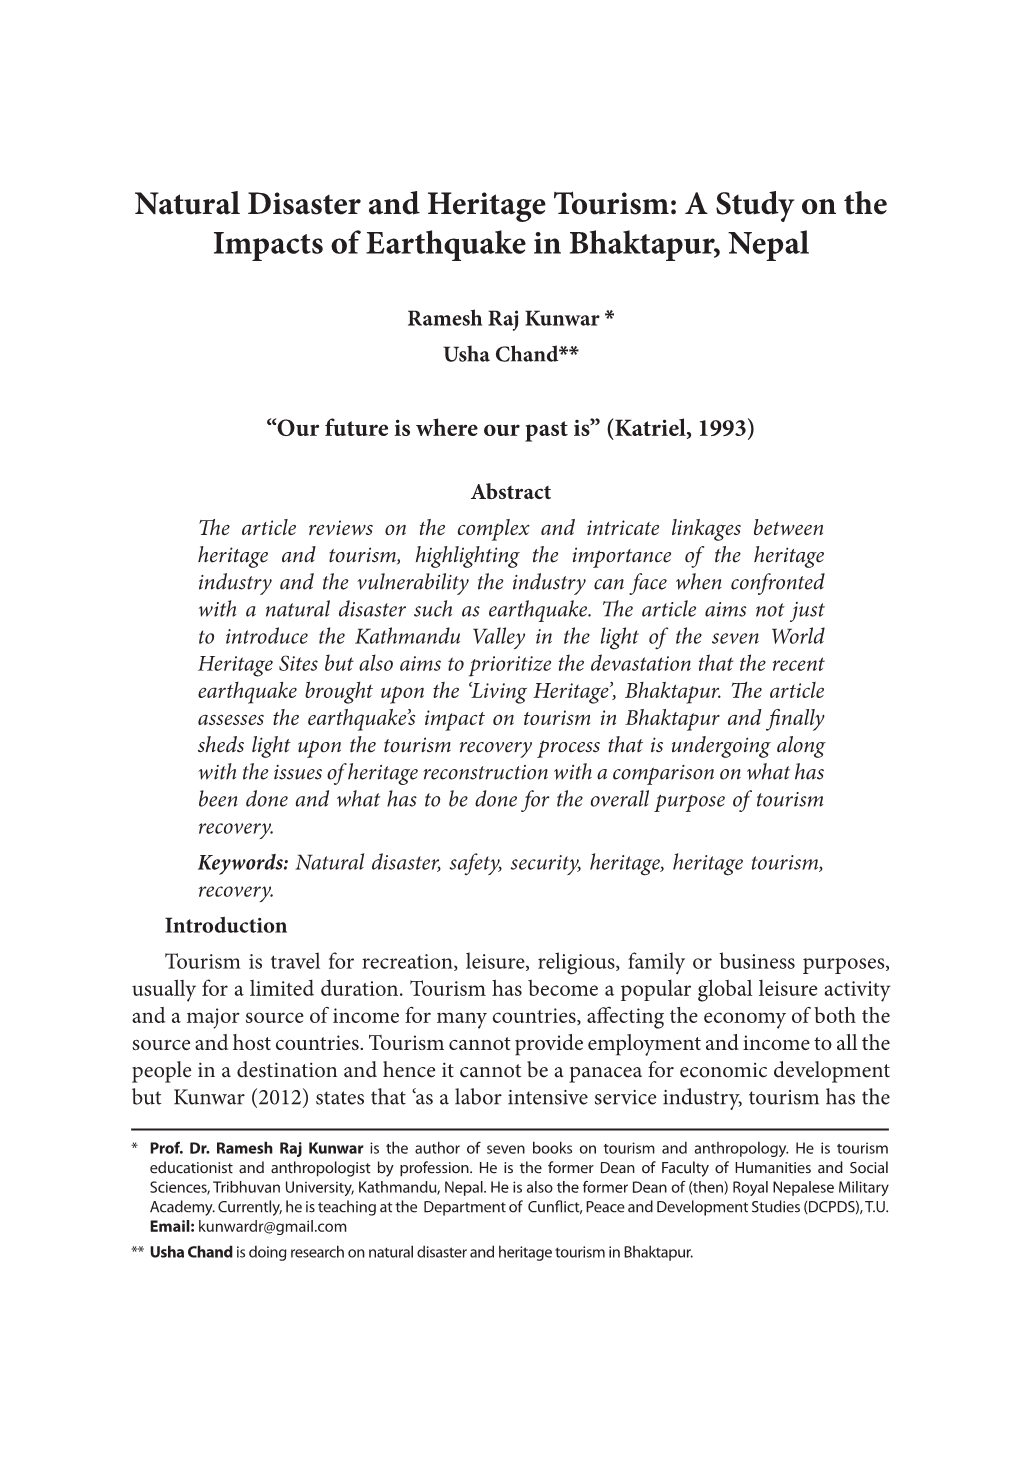 Natural Disaster and Heritage Tourism: a Study on the Impacts of Earthquake in Bhaktapur, Nepal